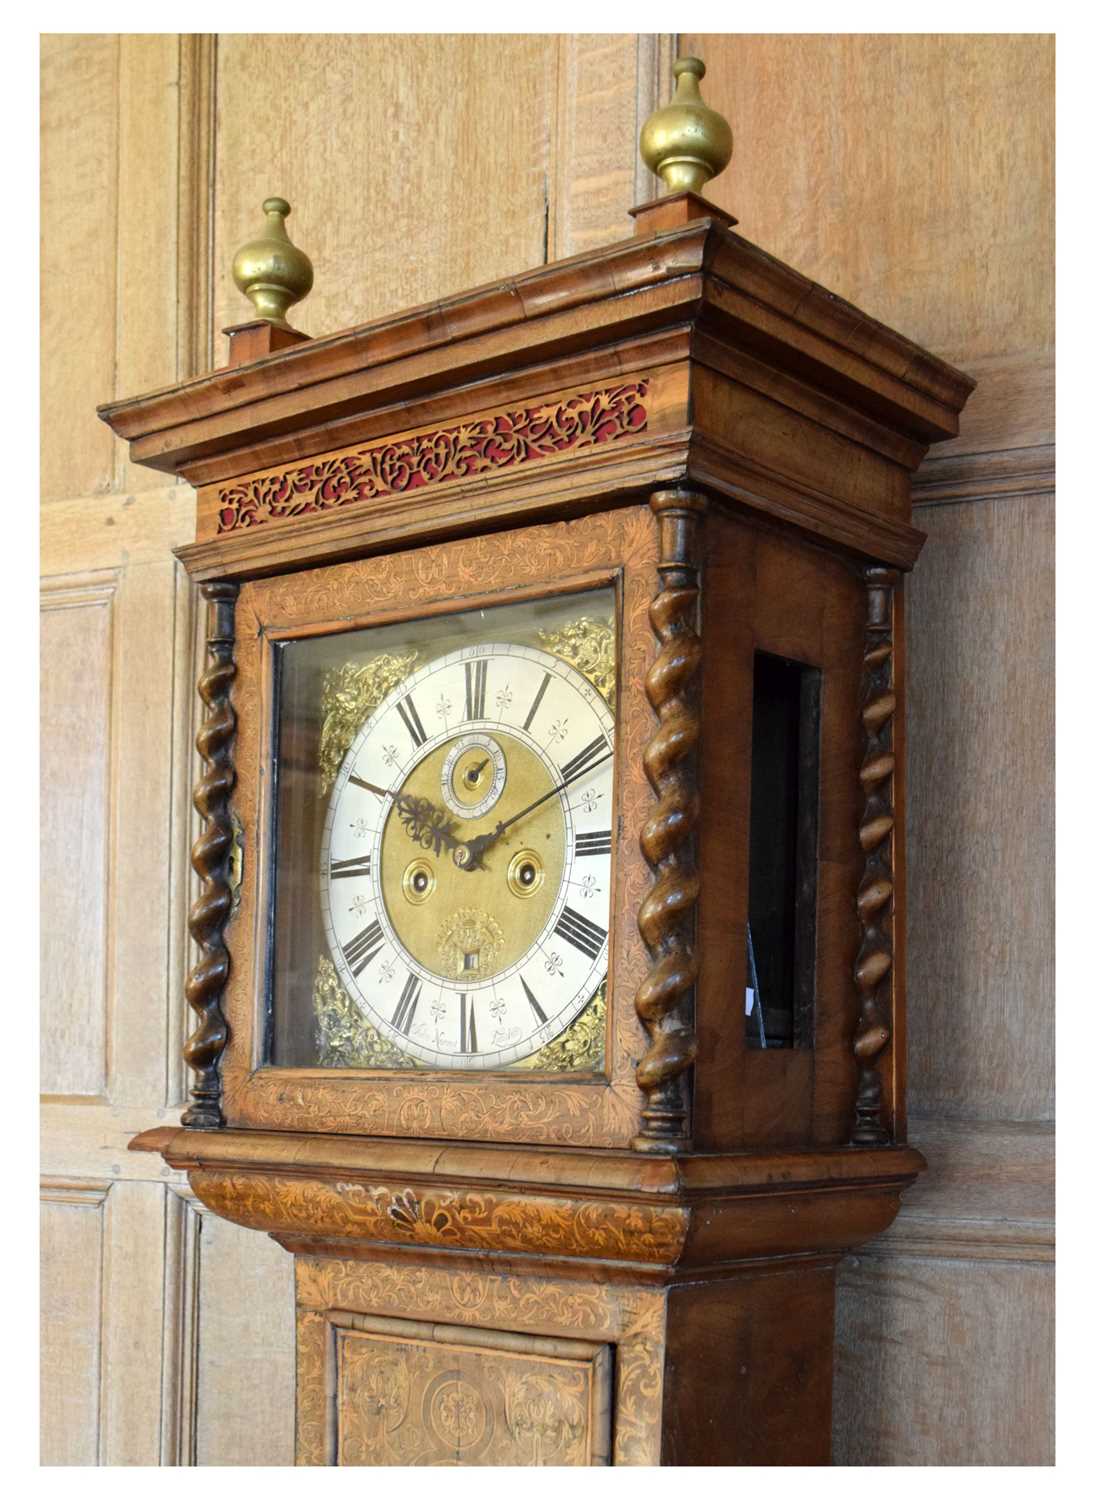 John Norcot, London – Fine walnut and seaweed marquetry eight-day brass dial longcase clock